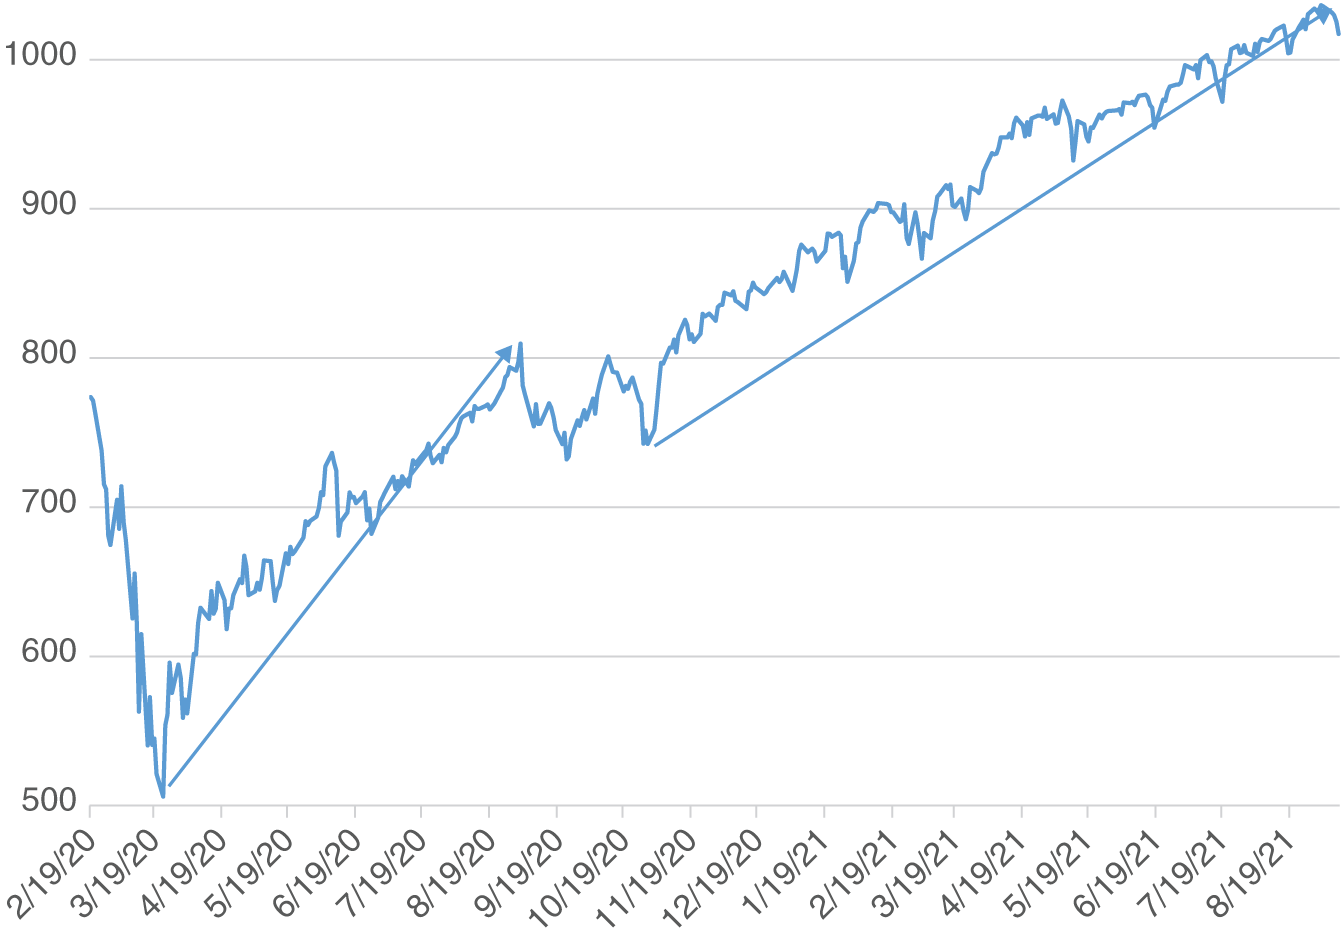 Graph depicts S&P 1500 Index